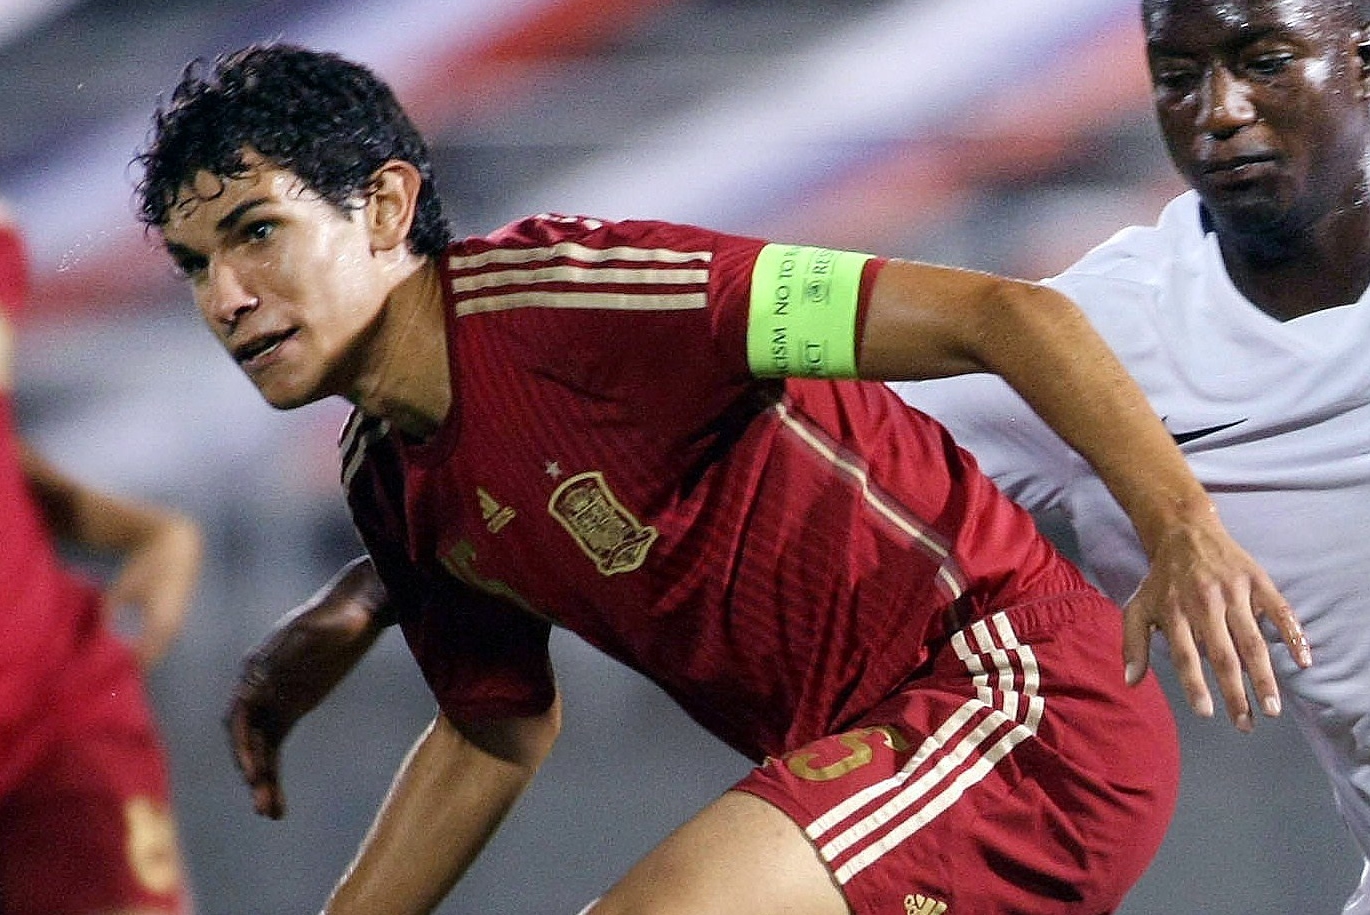 Real Madrid switch Jesus Vallejo's number AGAIN, you can't help